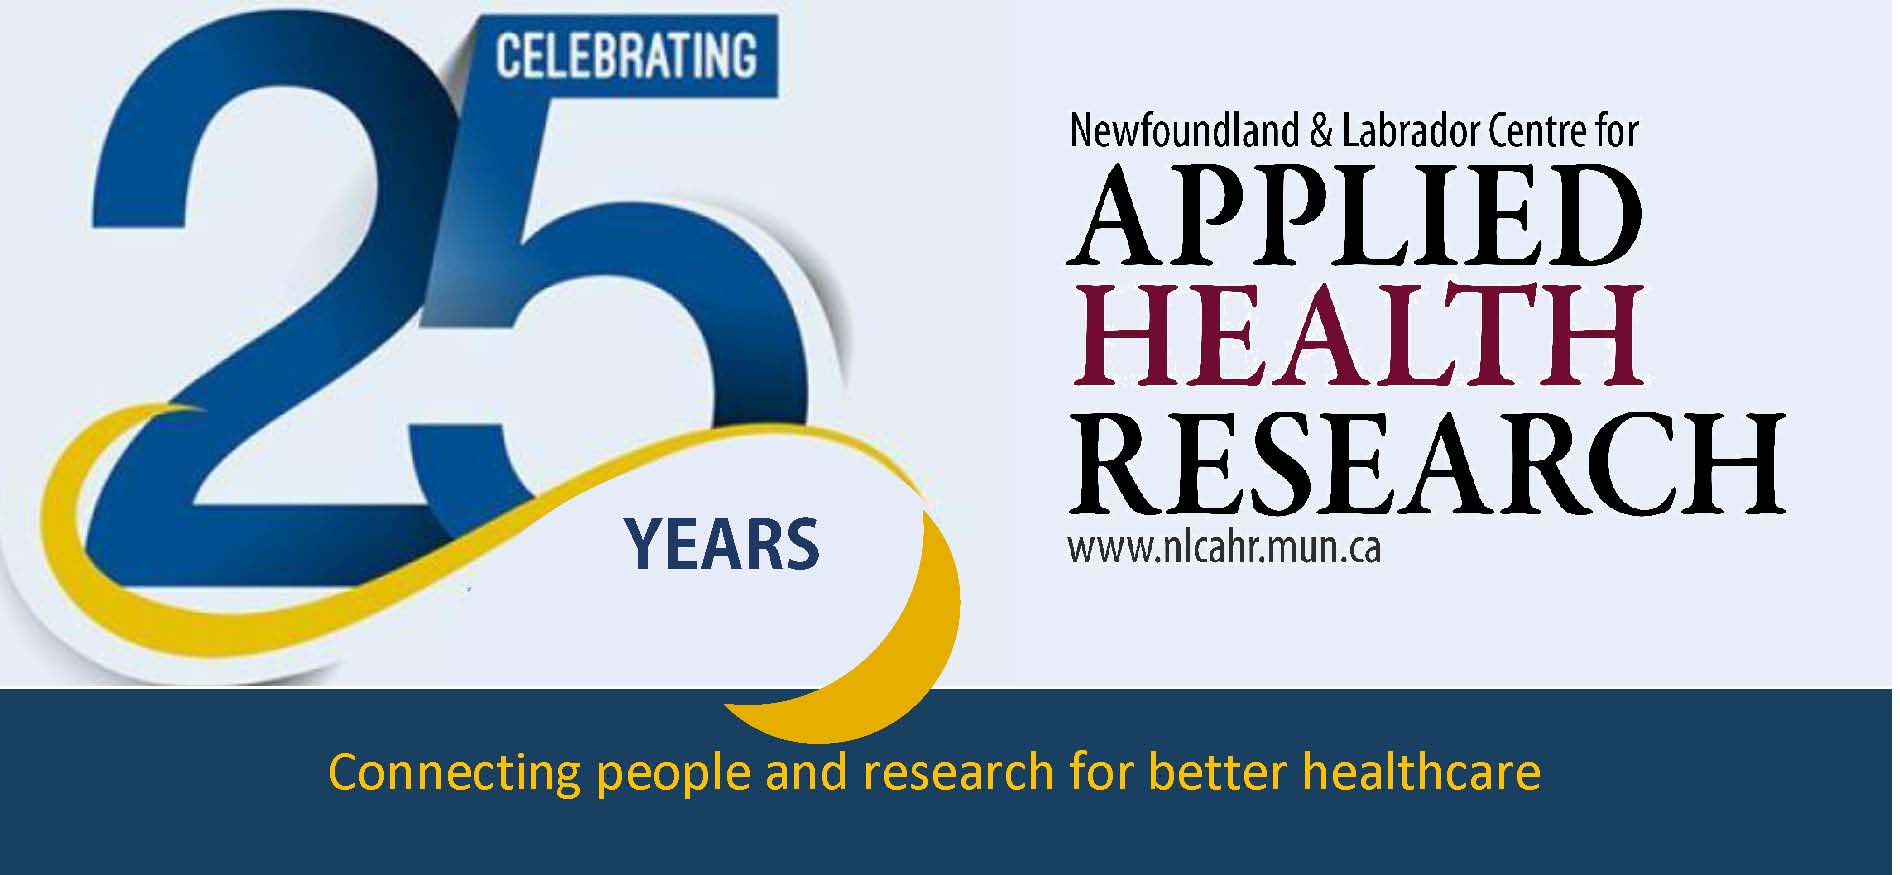 NLCAHR celebrates its 25th anniversary in 2024